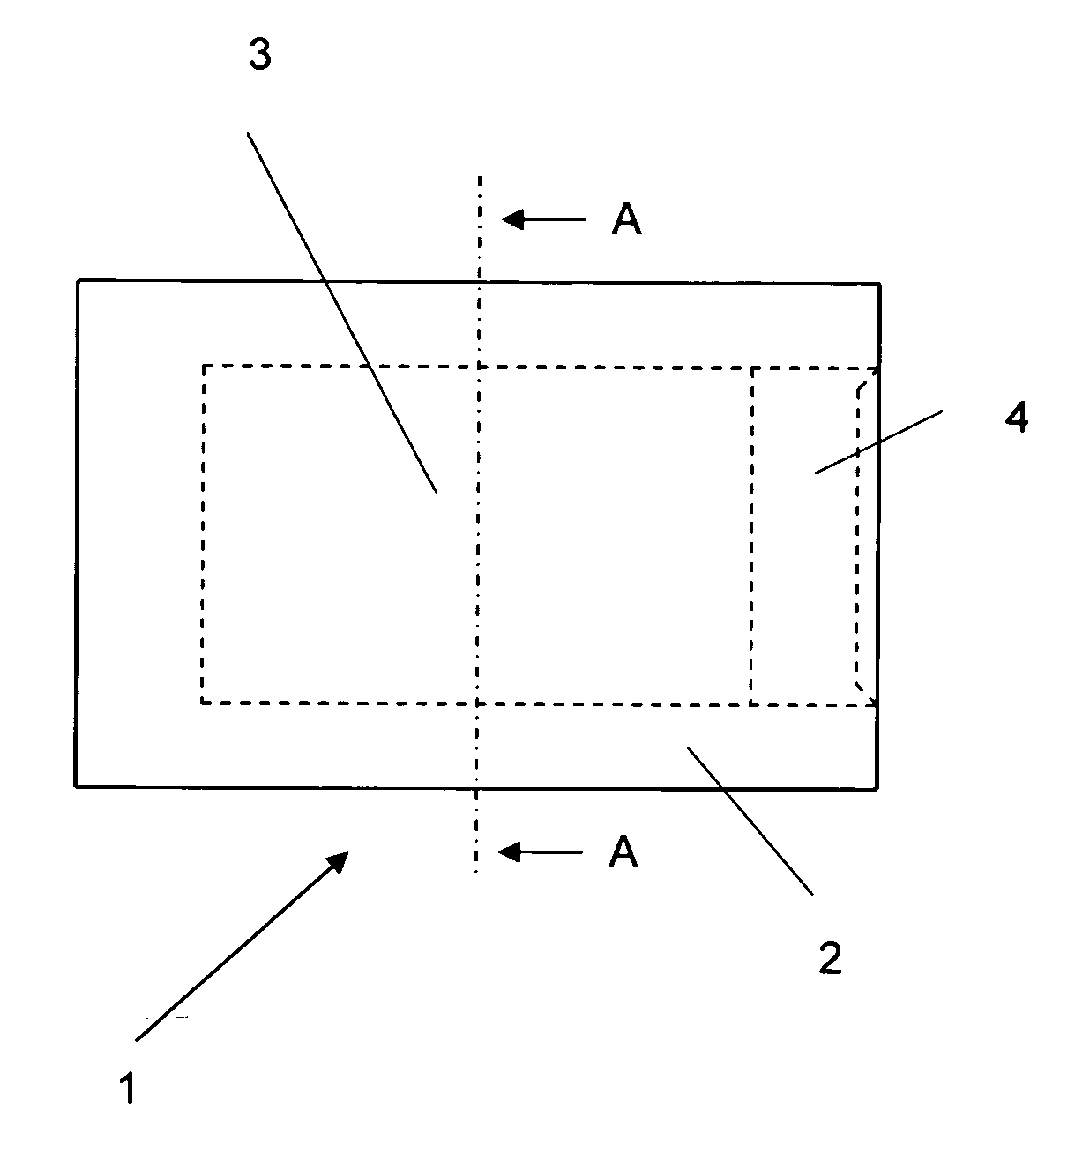 Subprojectile having an energy content